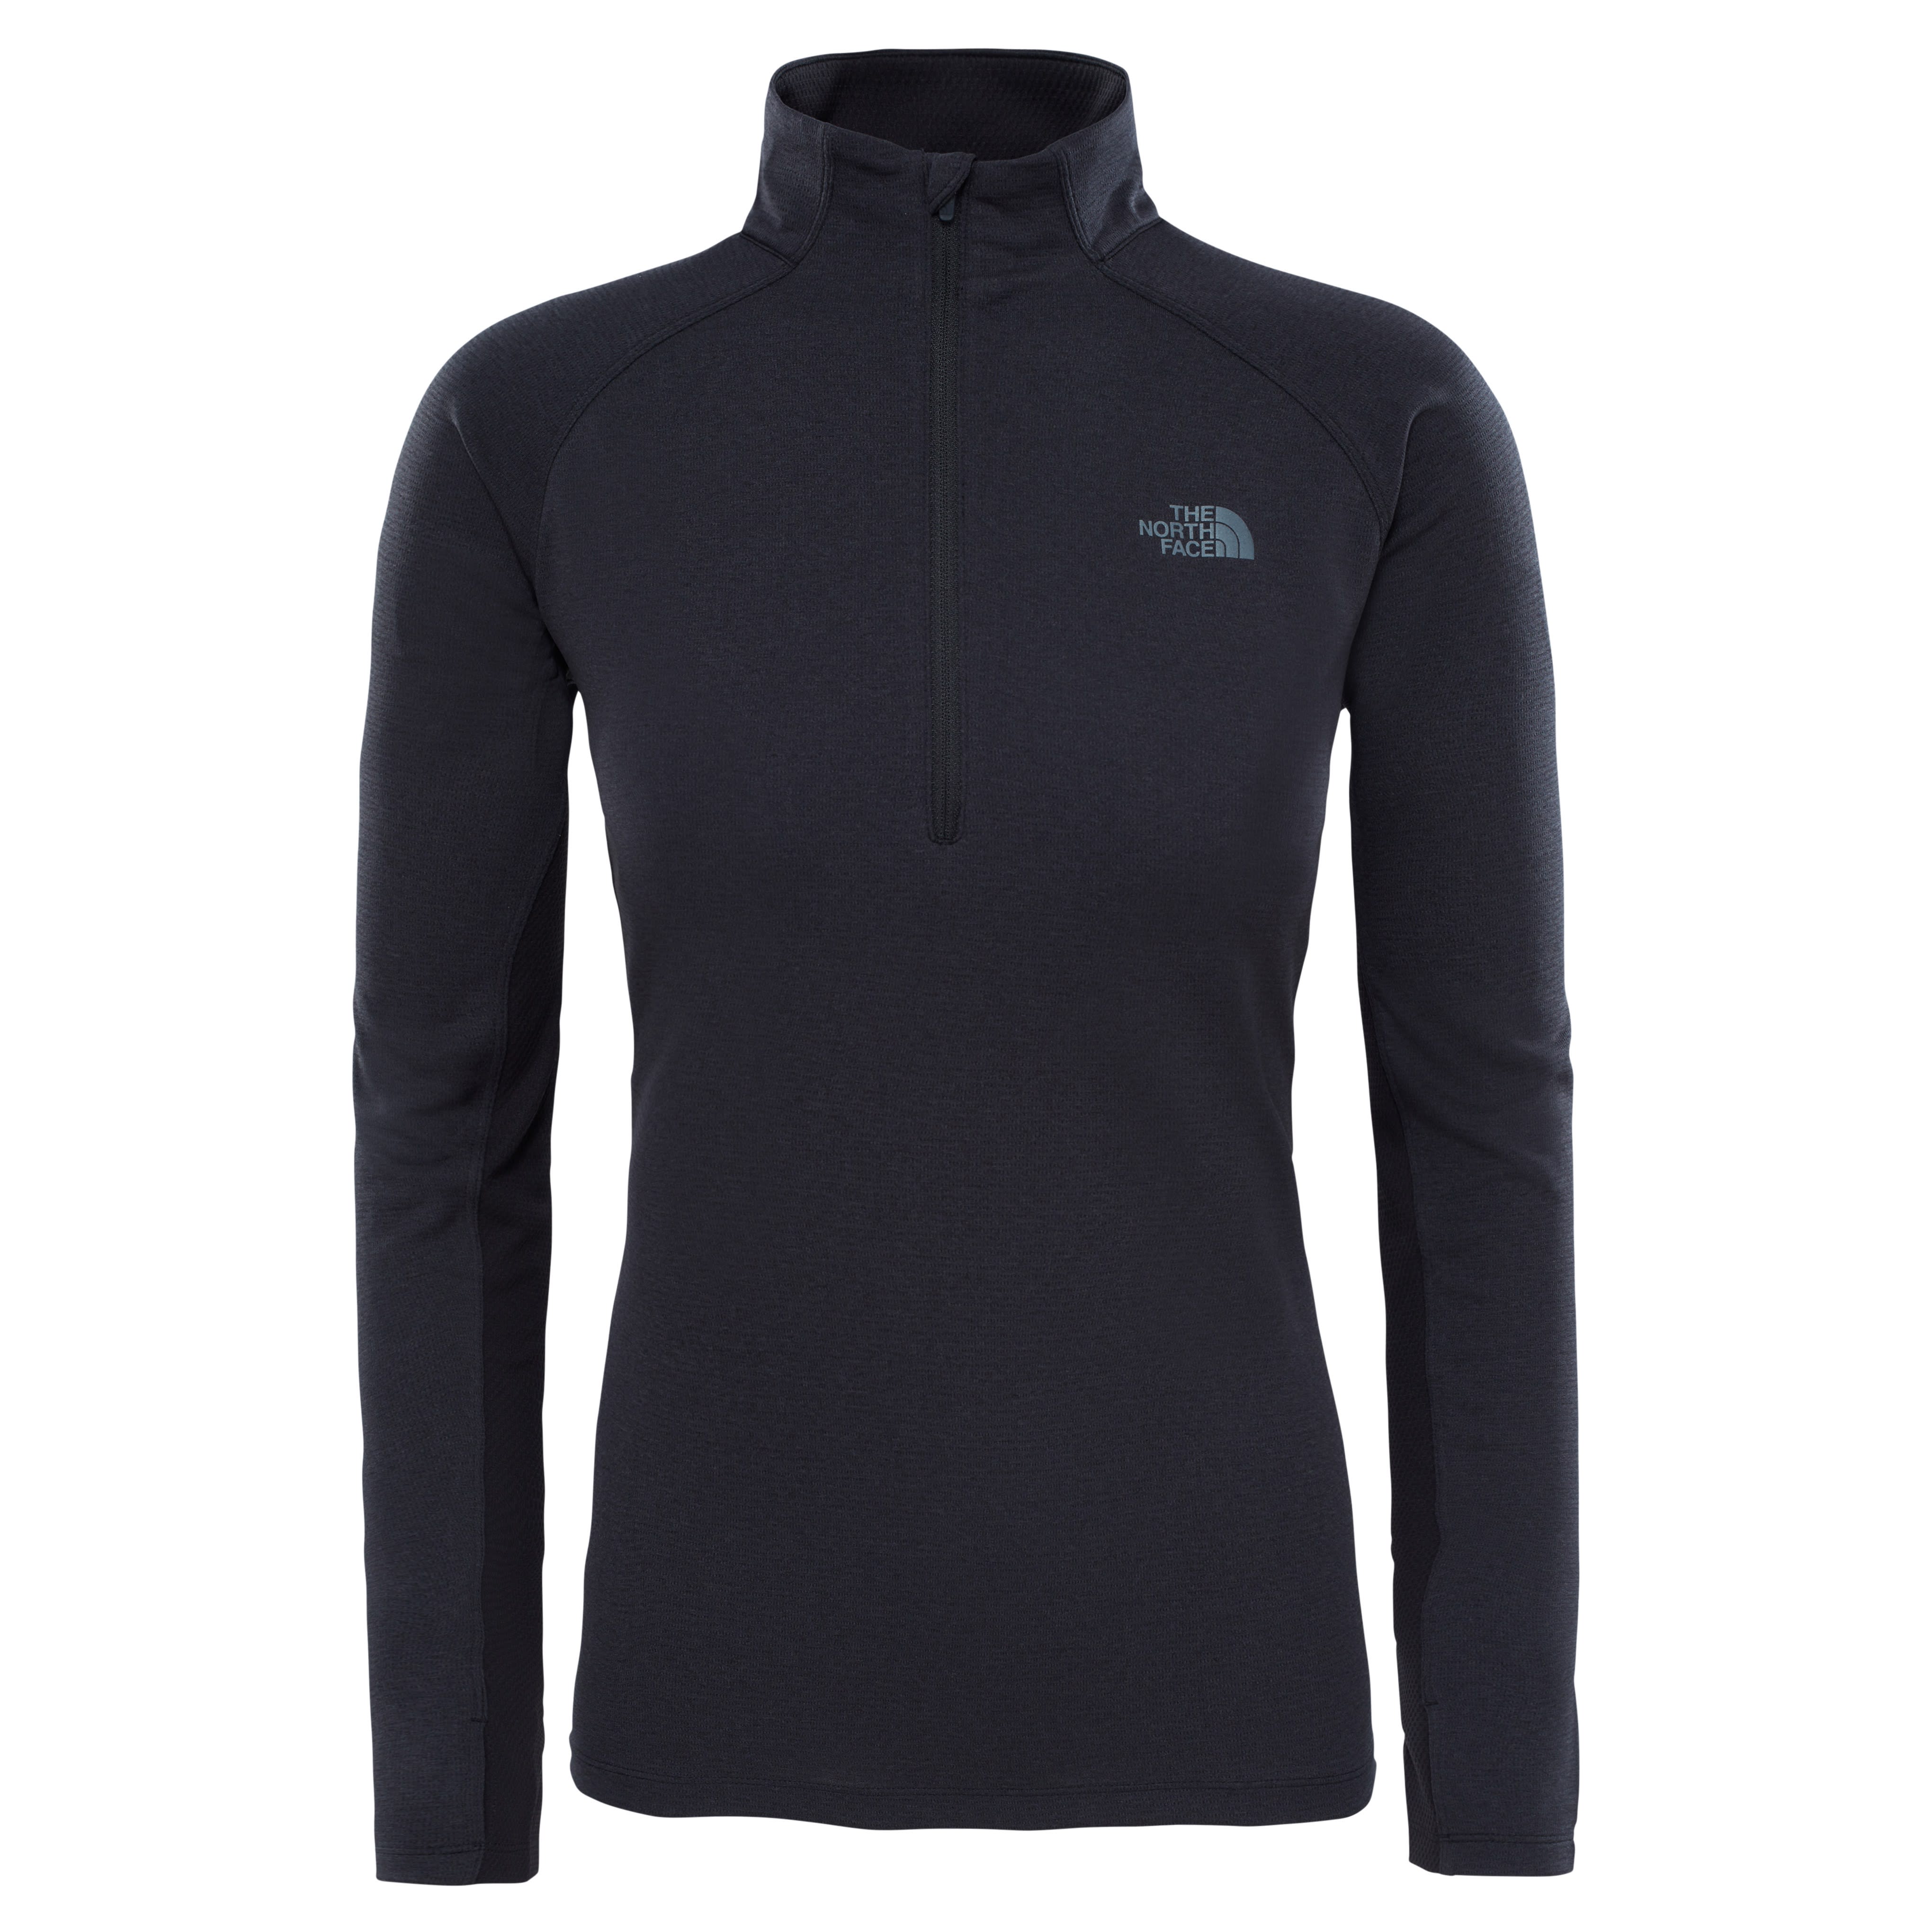 Buy The North Face W Ambition 1/4 Zip from Outnorth